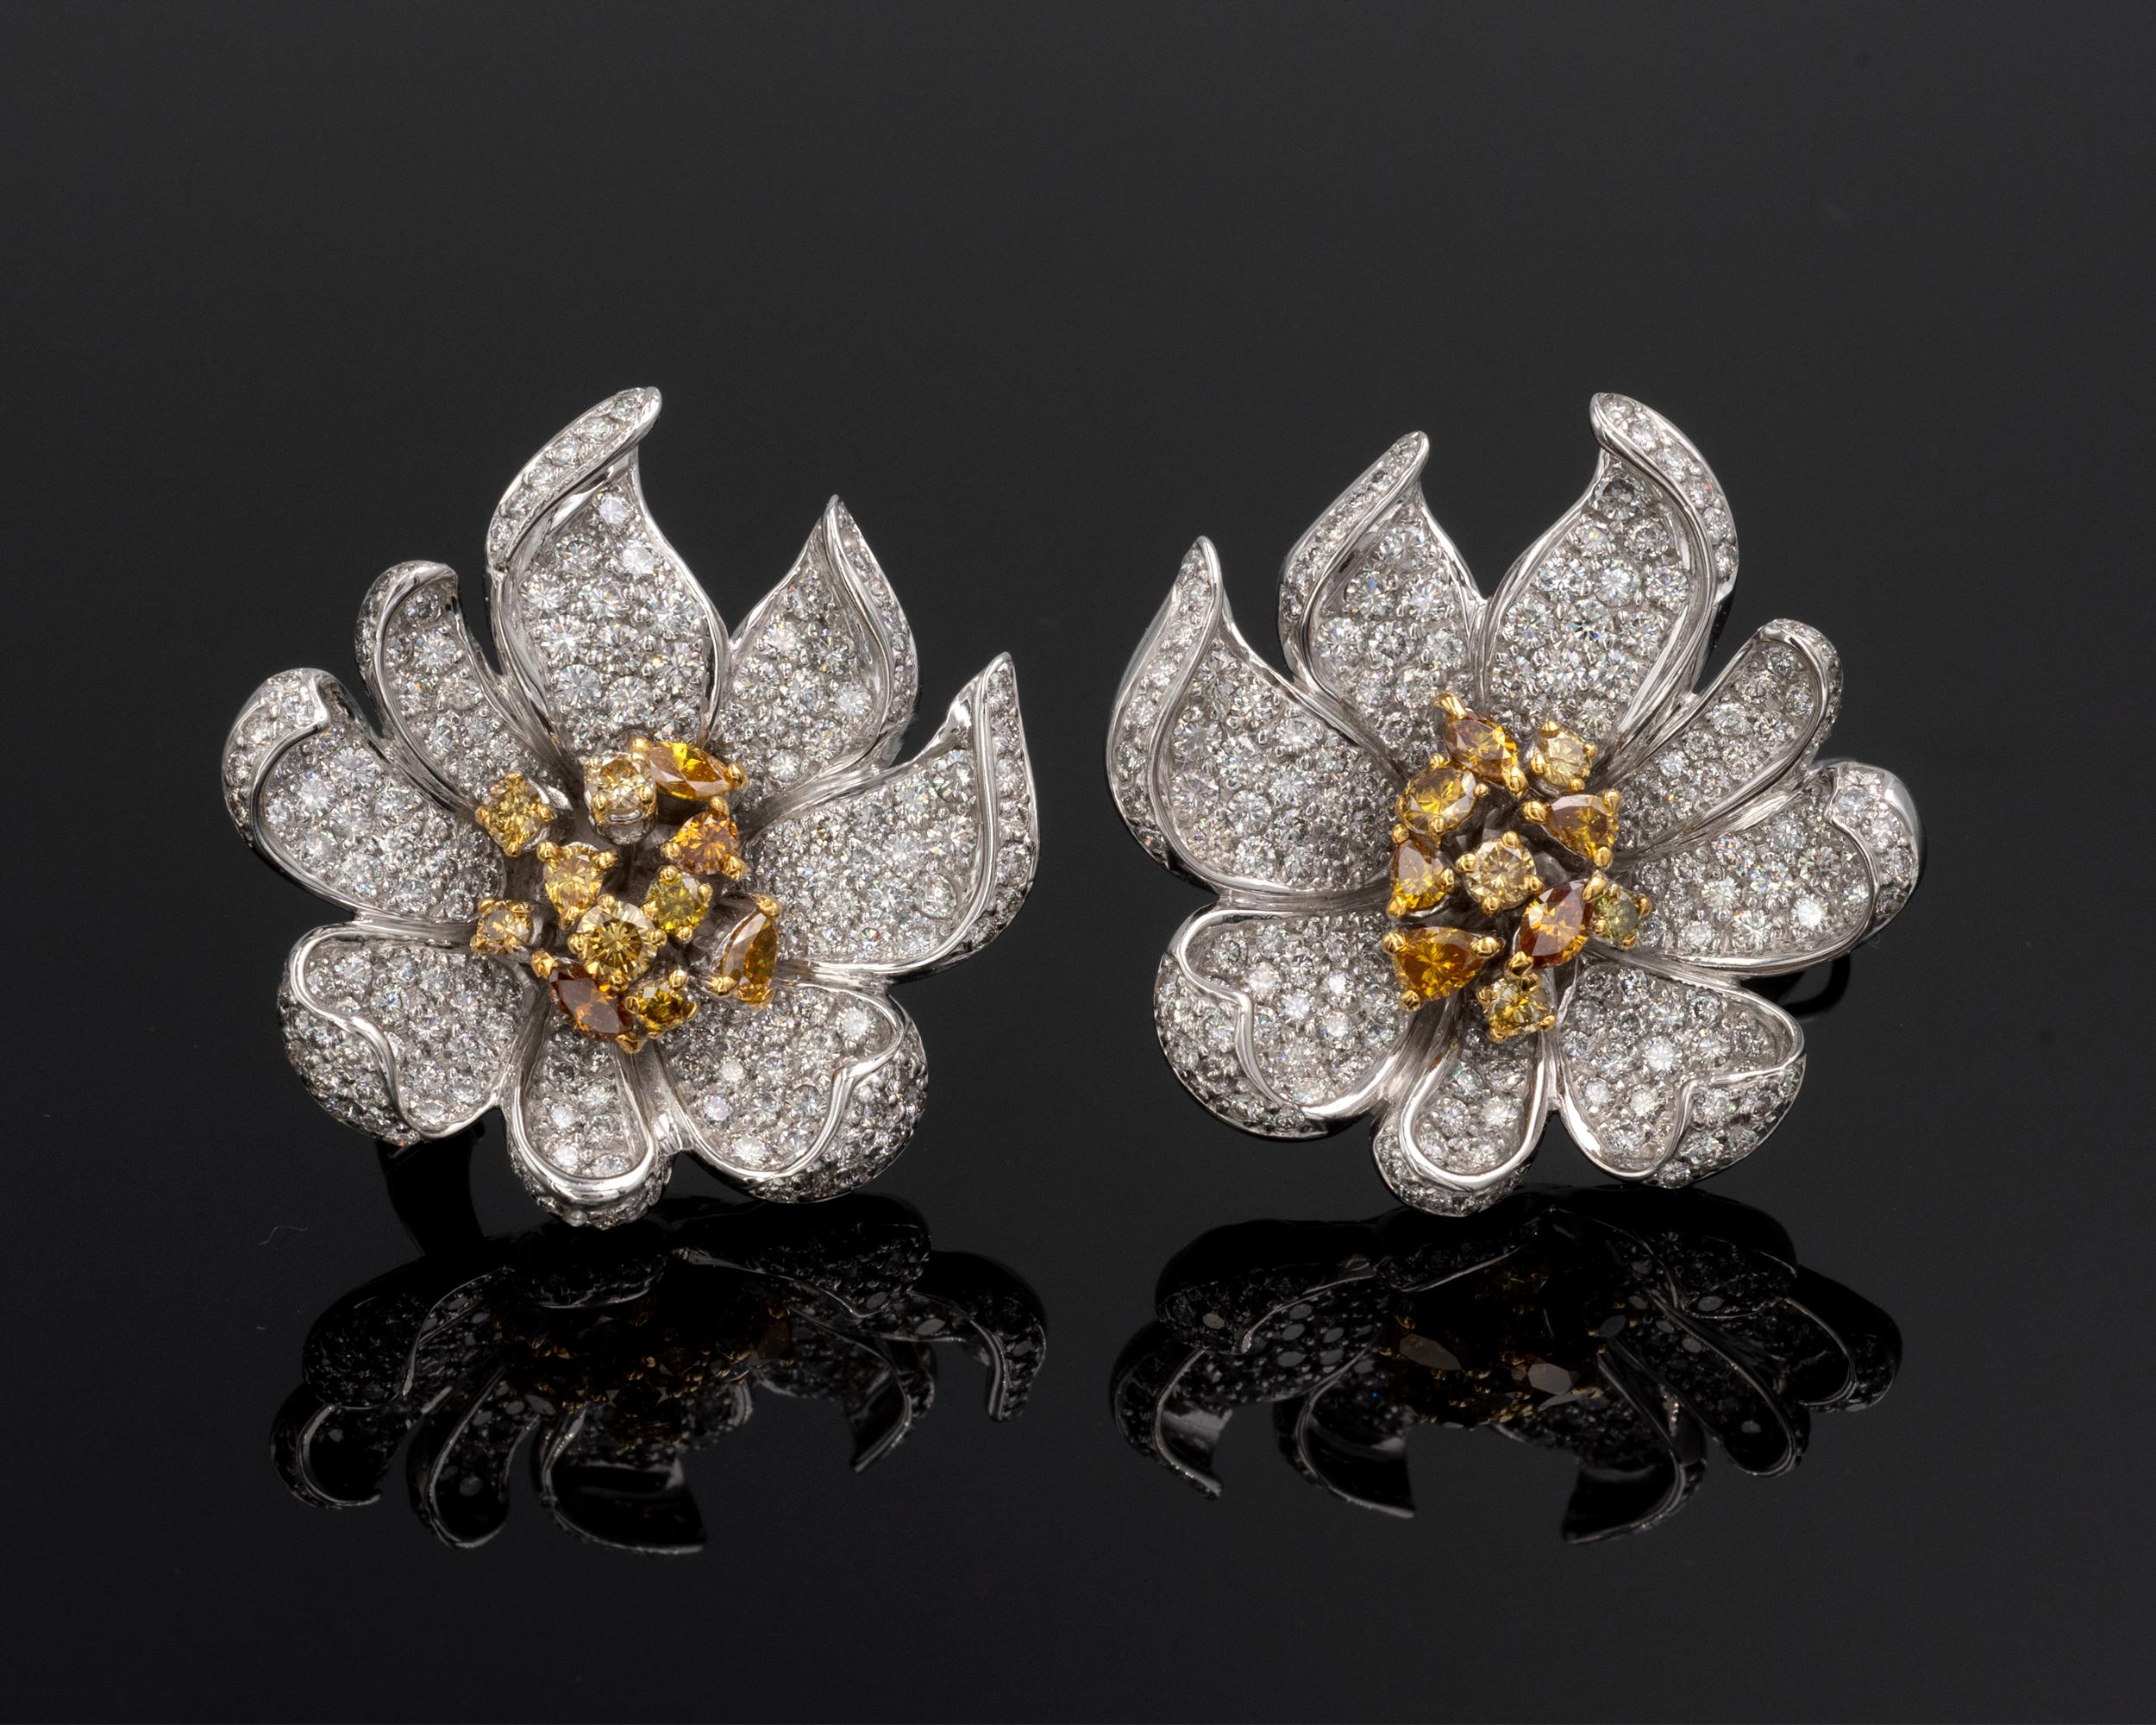 Impressive Flower earrings: the exquisitely shaped petals are pavé set with white diamonds ( F/G-VVS/ VS) the center of the flower is made of natural fancy intense yellow coloured diamonds set on yellow gold. The make is excellent; the 